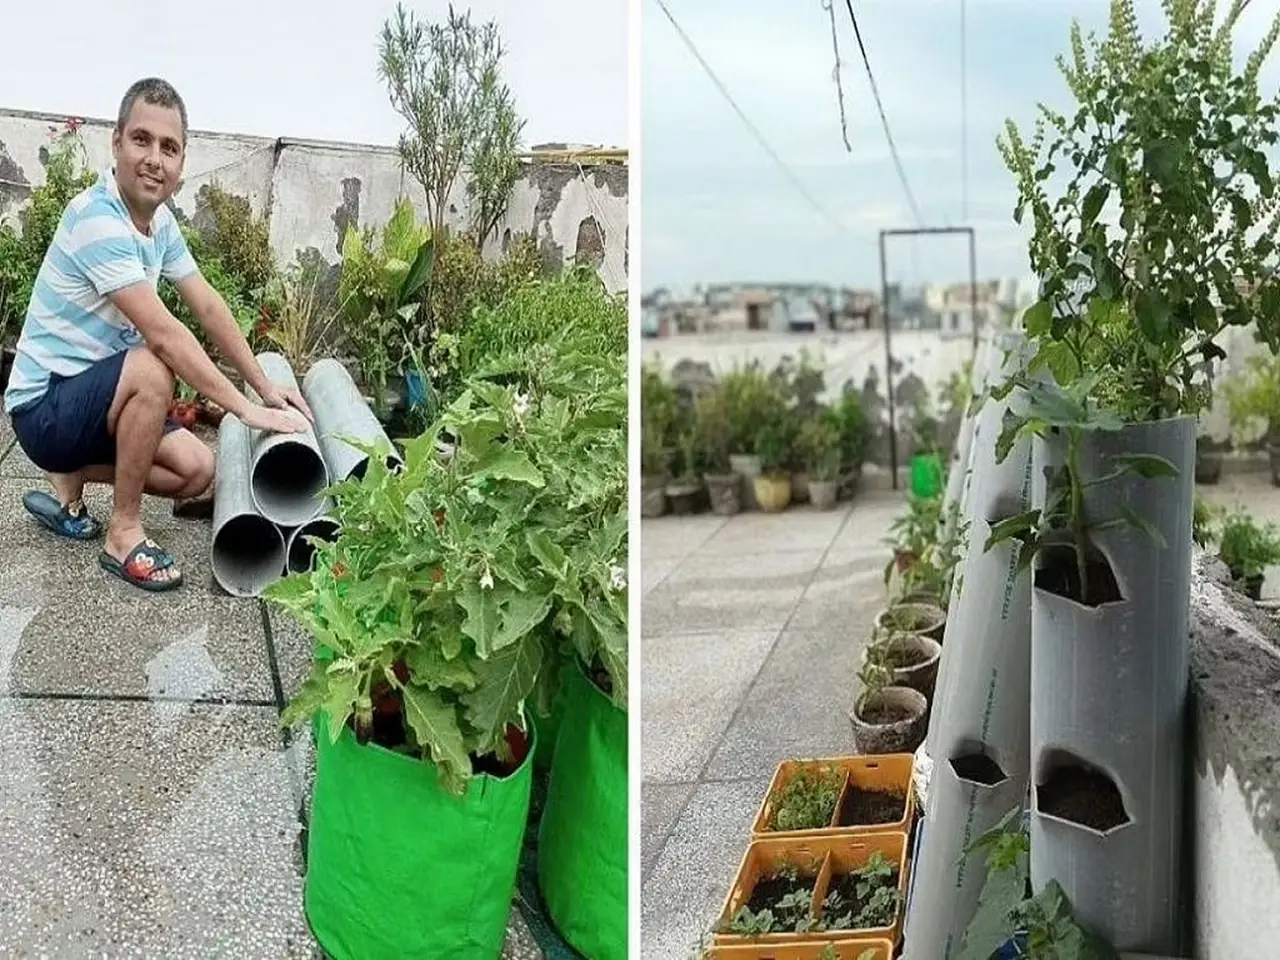 Uttar Pradesh born Mithilesh Kumar Singh has created an urban vertical garden using PVC pipes to save on cost and space, and also runs Veg Roof, a farming startup that shares gardening tips.